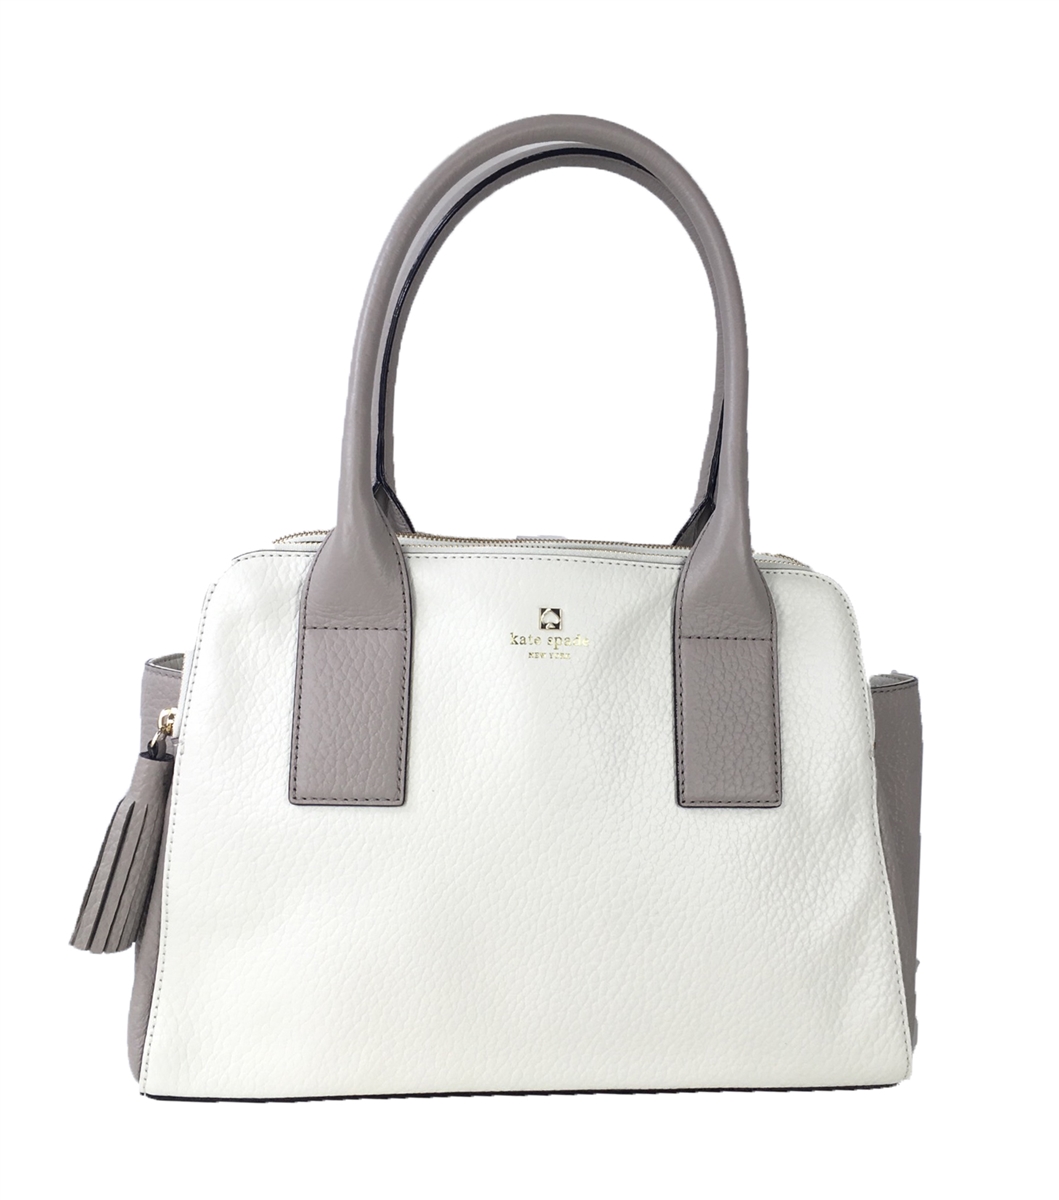 kate spade pebbled leather tote